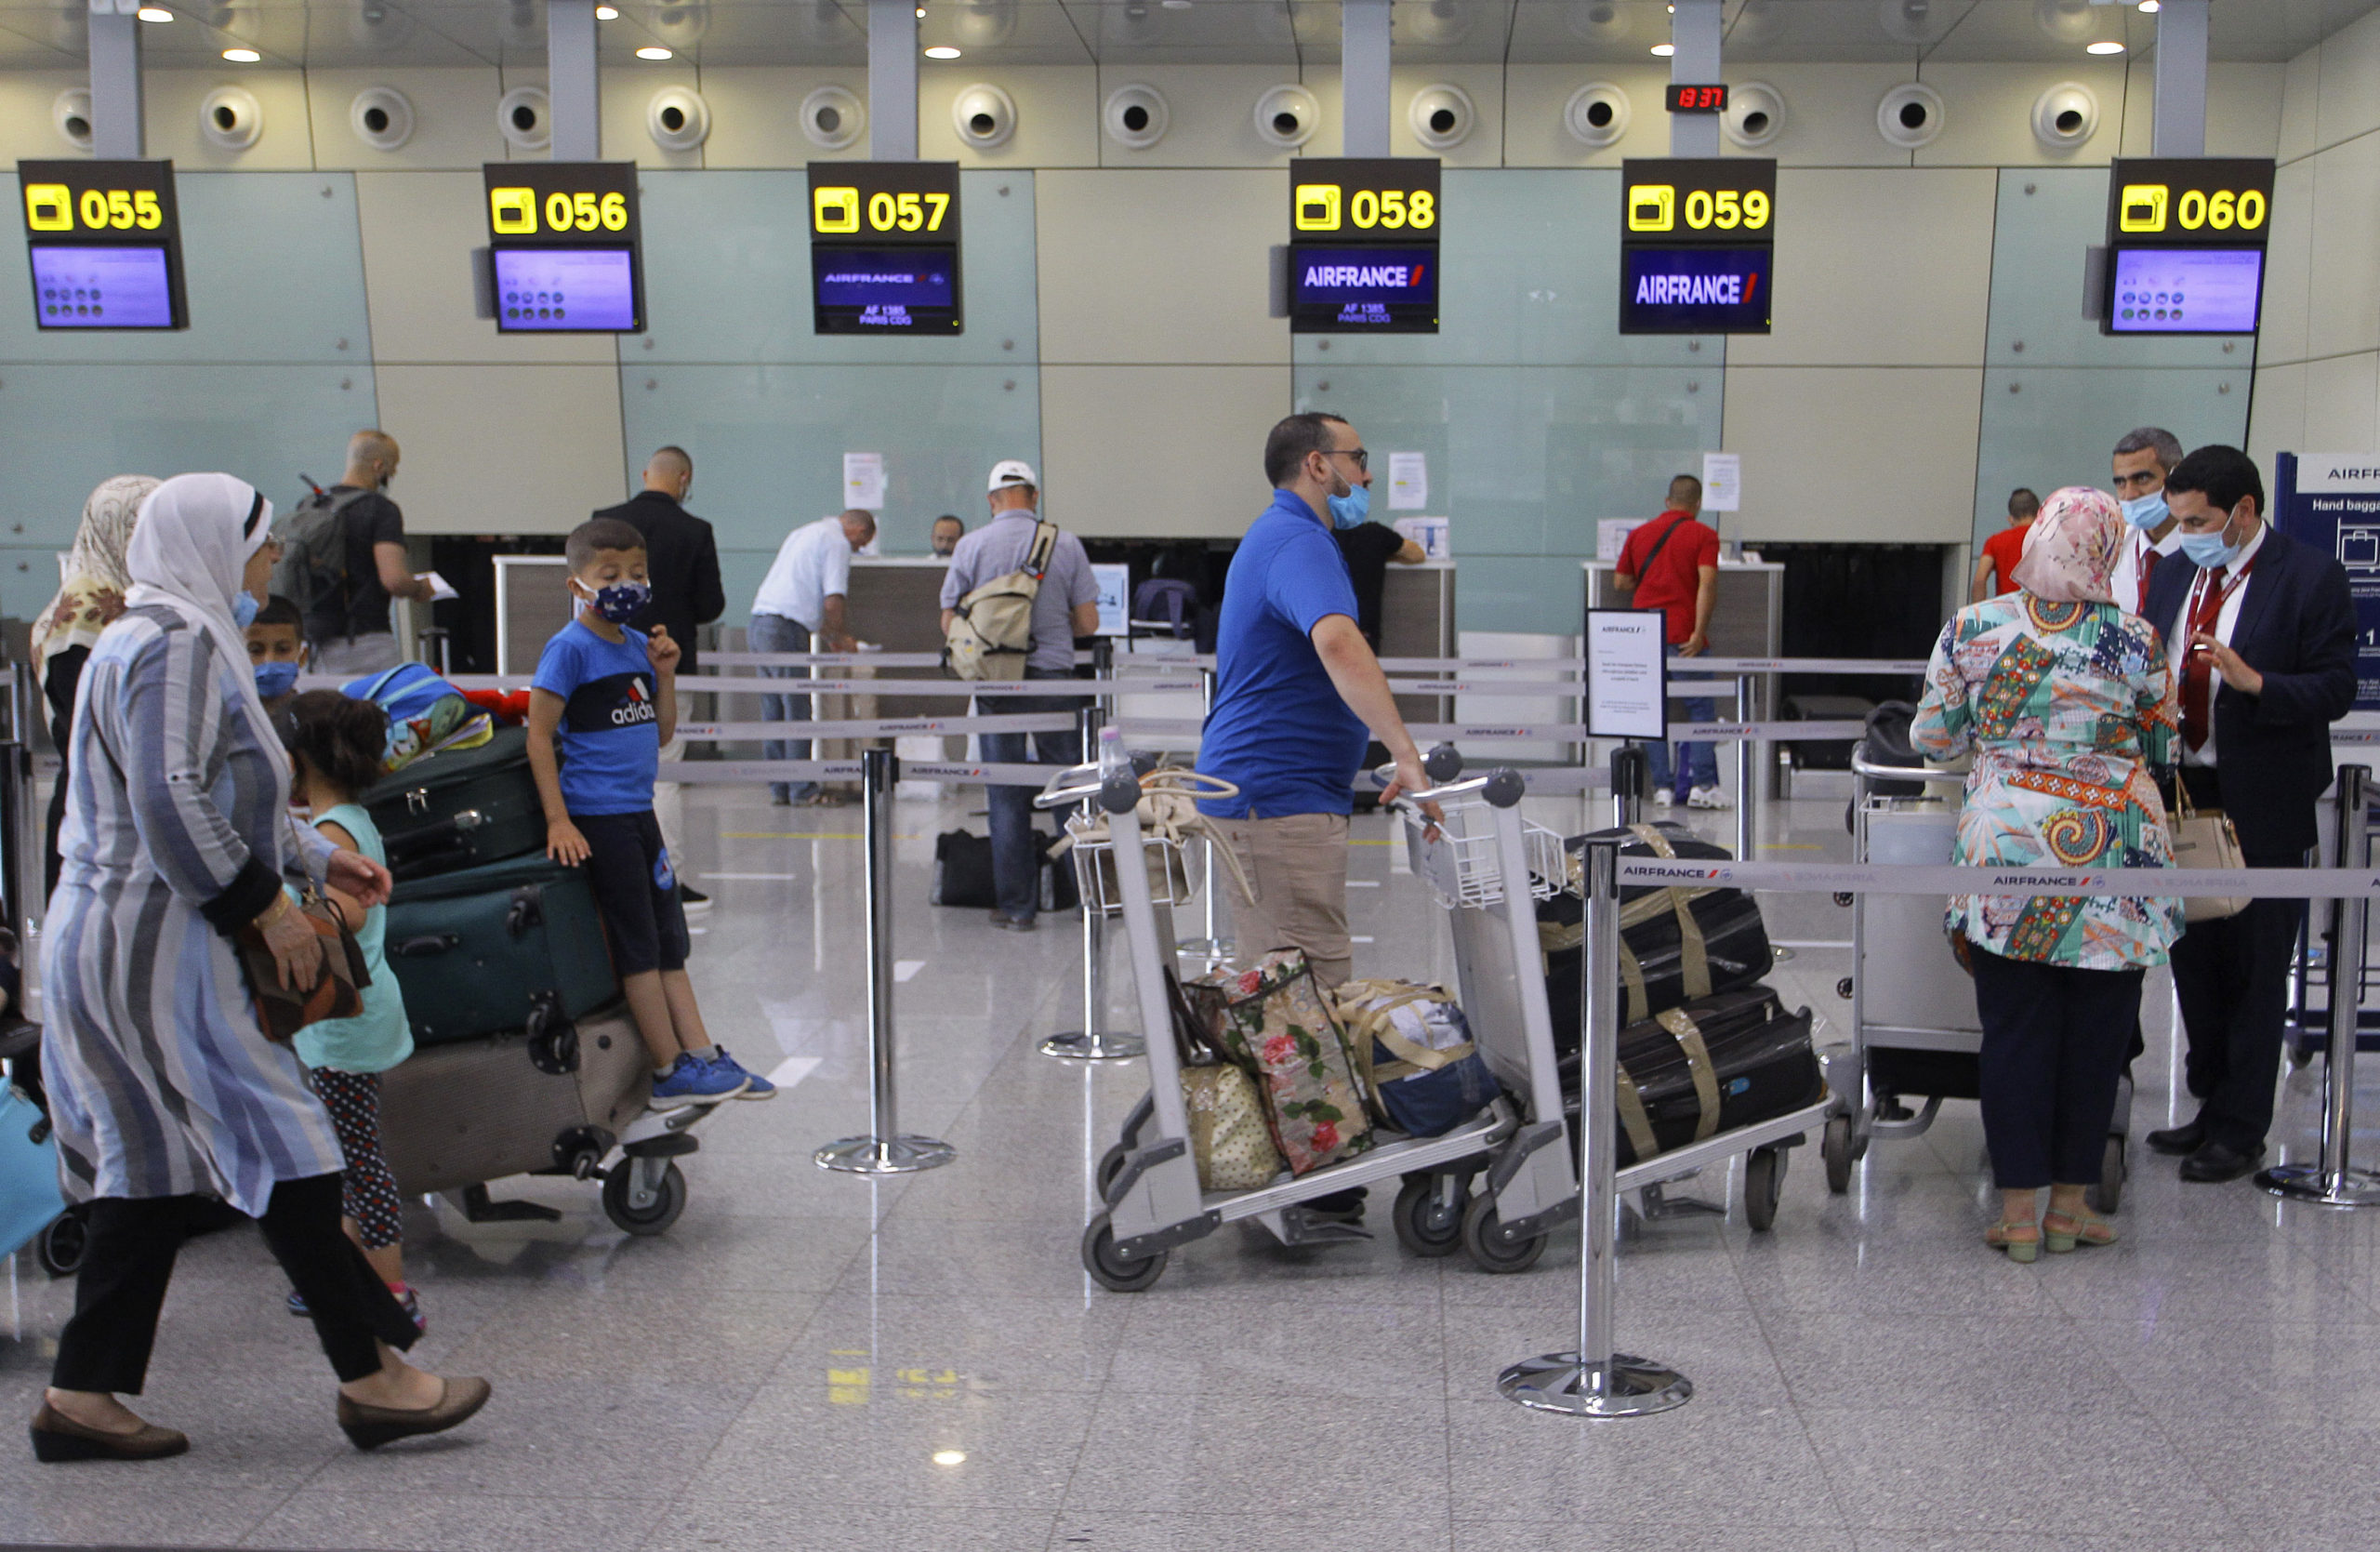 Will summer 2021 become airport waiting time nightmare?